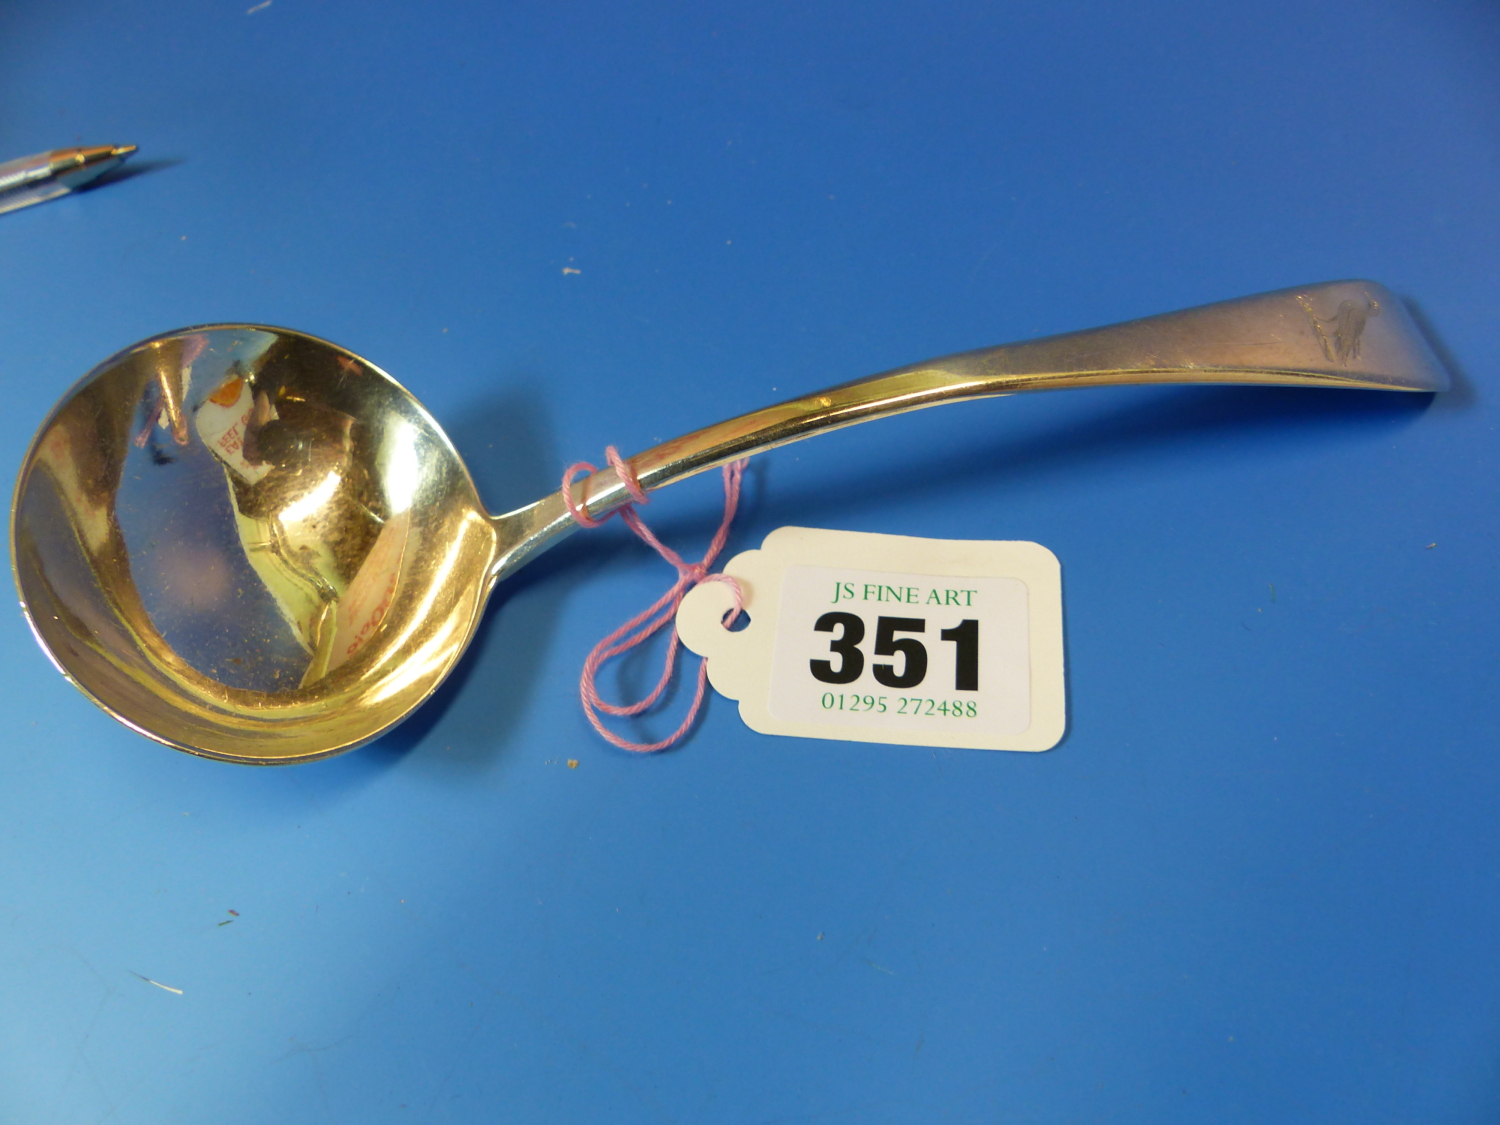 A PAIR OF 19th C. QUEENS PATTERN HALLMARKED SILVER SAUCE LADLES DATED 1851 GLASGOW FOR JOHN - Image 17 of 28